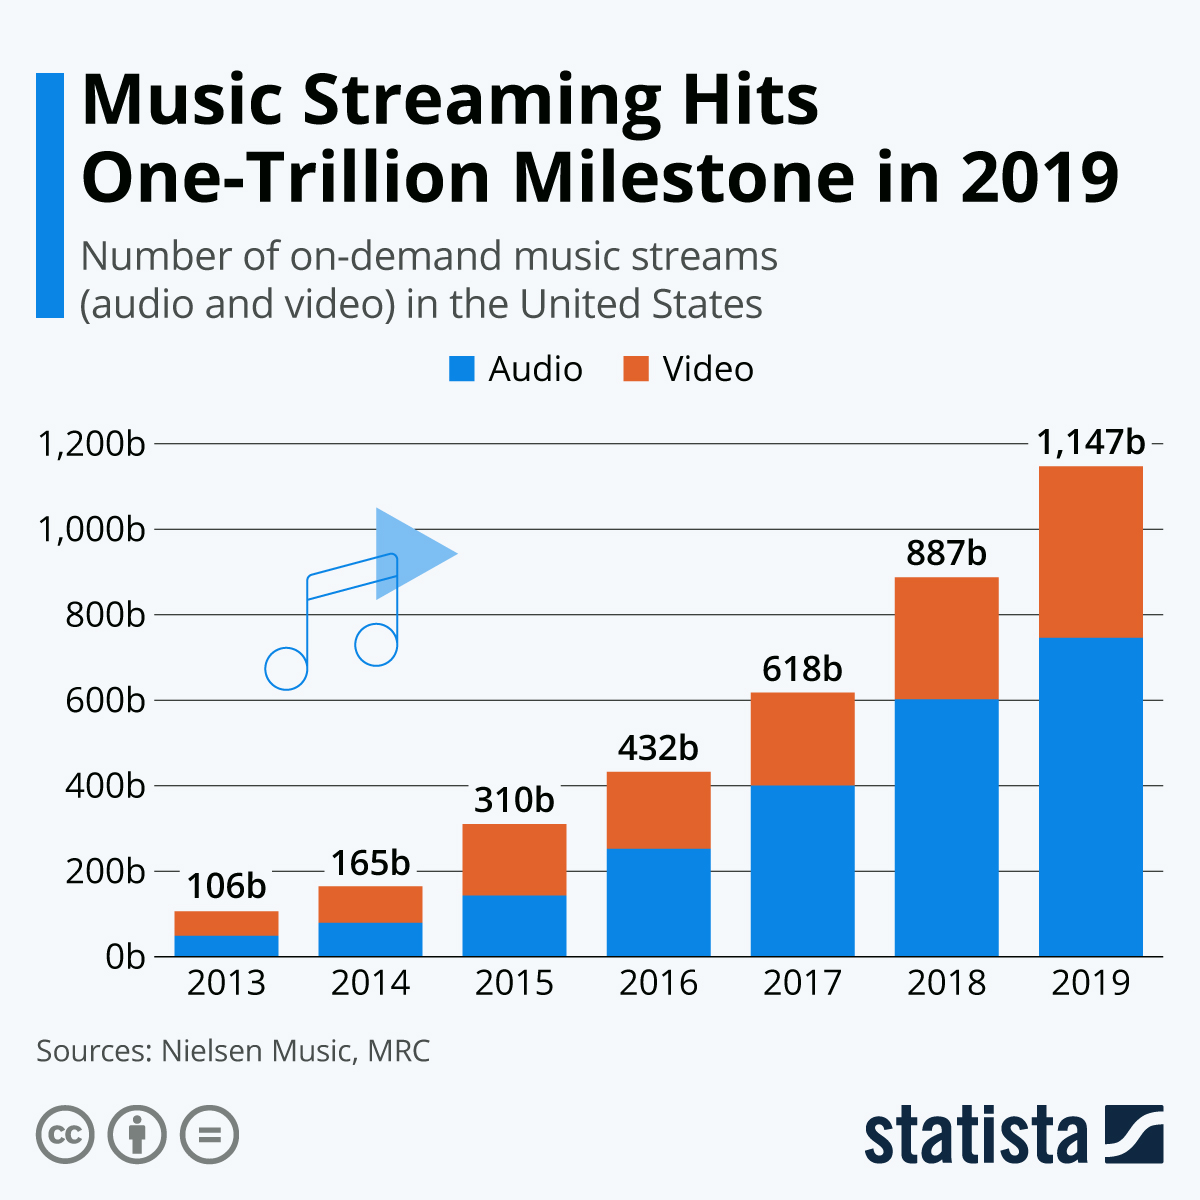 Music exceeded one-trillion streams in the US in 2019 alone